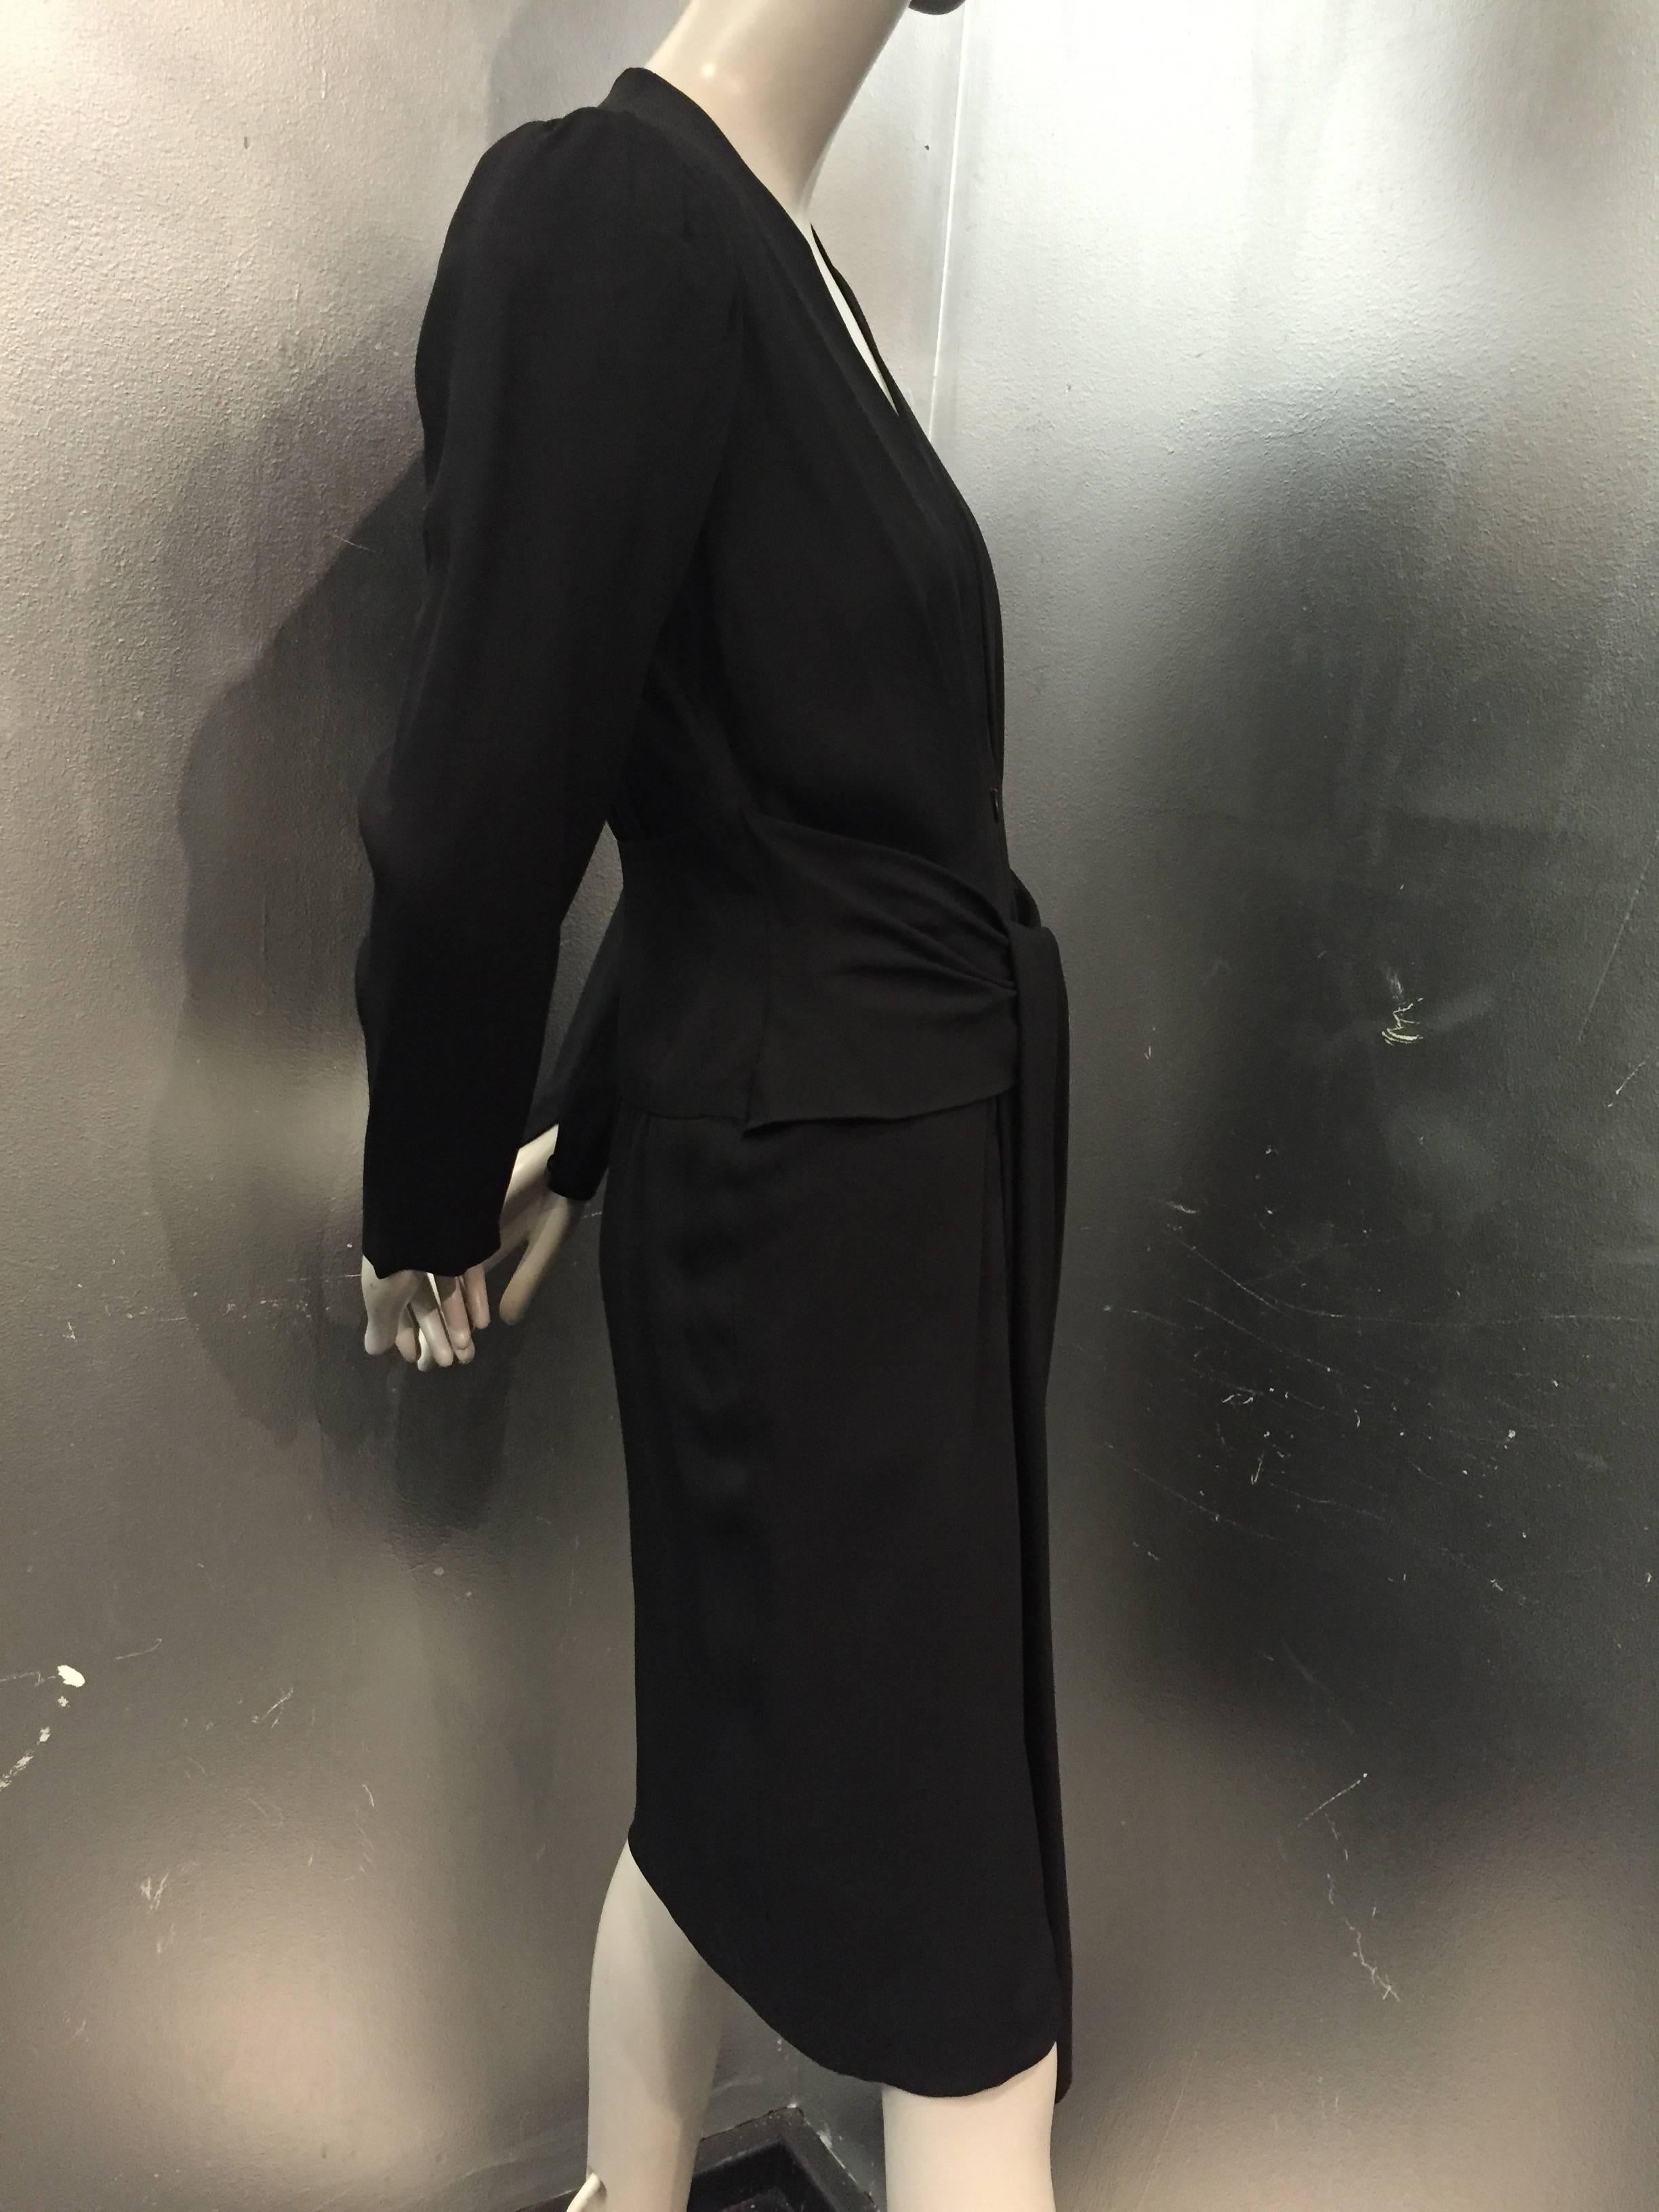 1980s Ted Lapidus Black Crepe Cocktail Dress w/ 1940s-Inspired Style 2